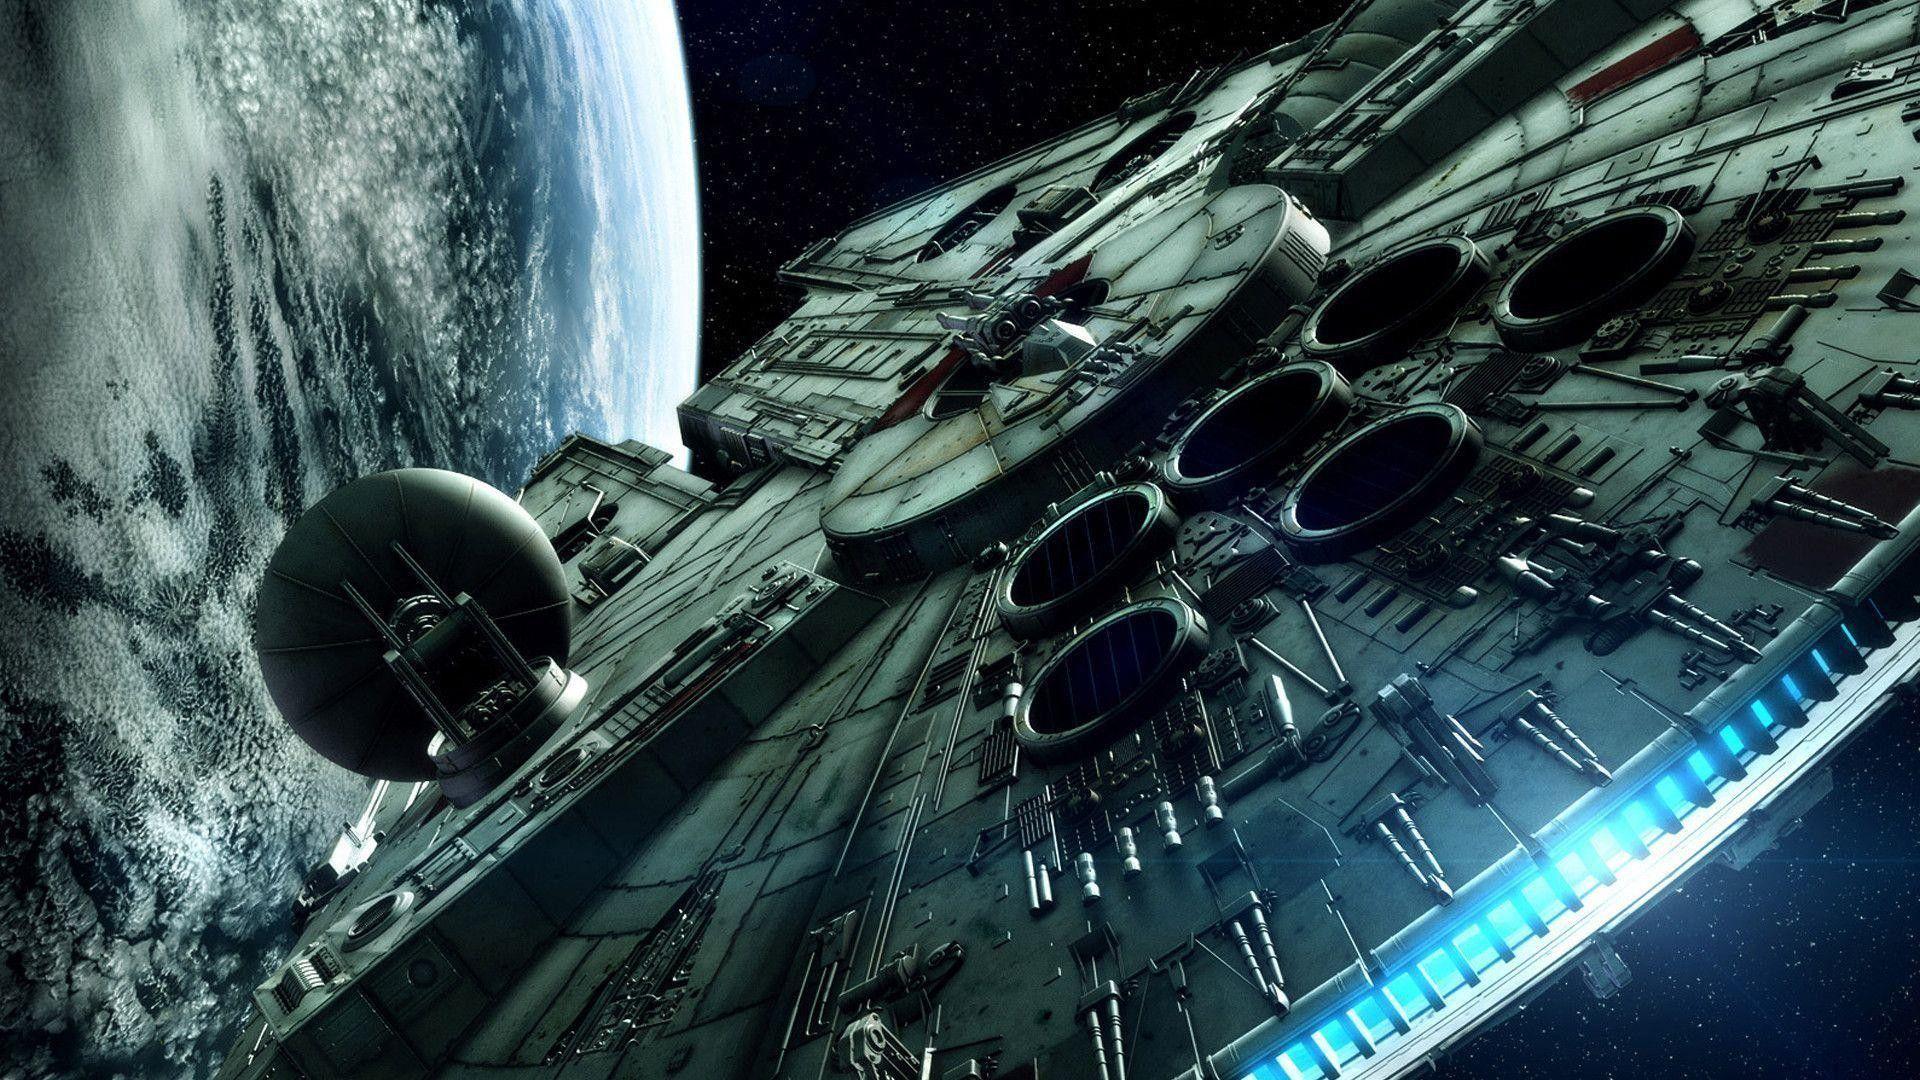 510370 1920x1080 star wars desktop wallpaper pictures free PNG 1382 kB   Rare Gallery HD Wallpapers